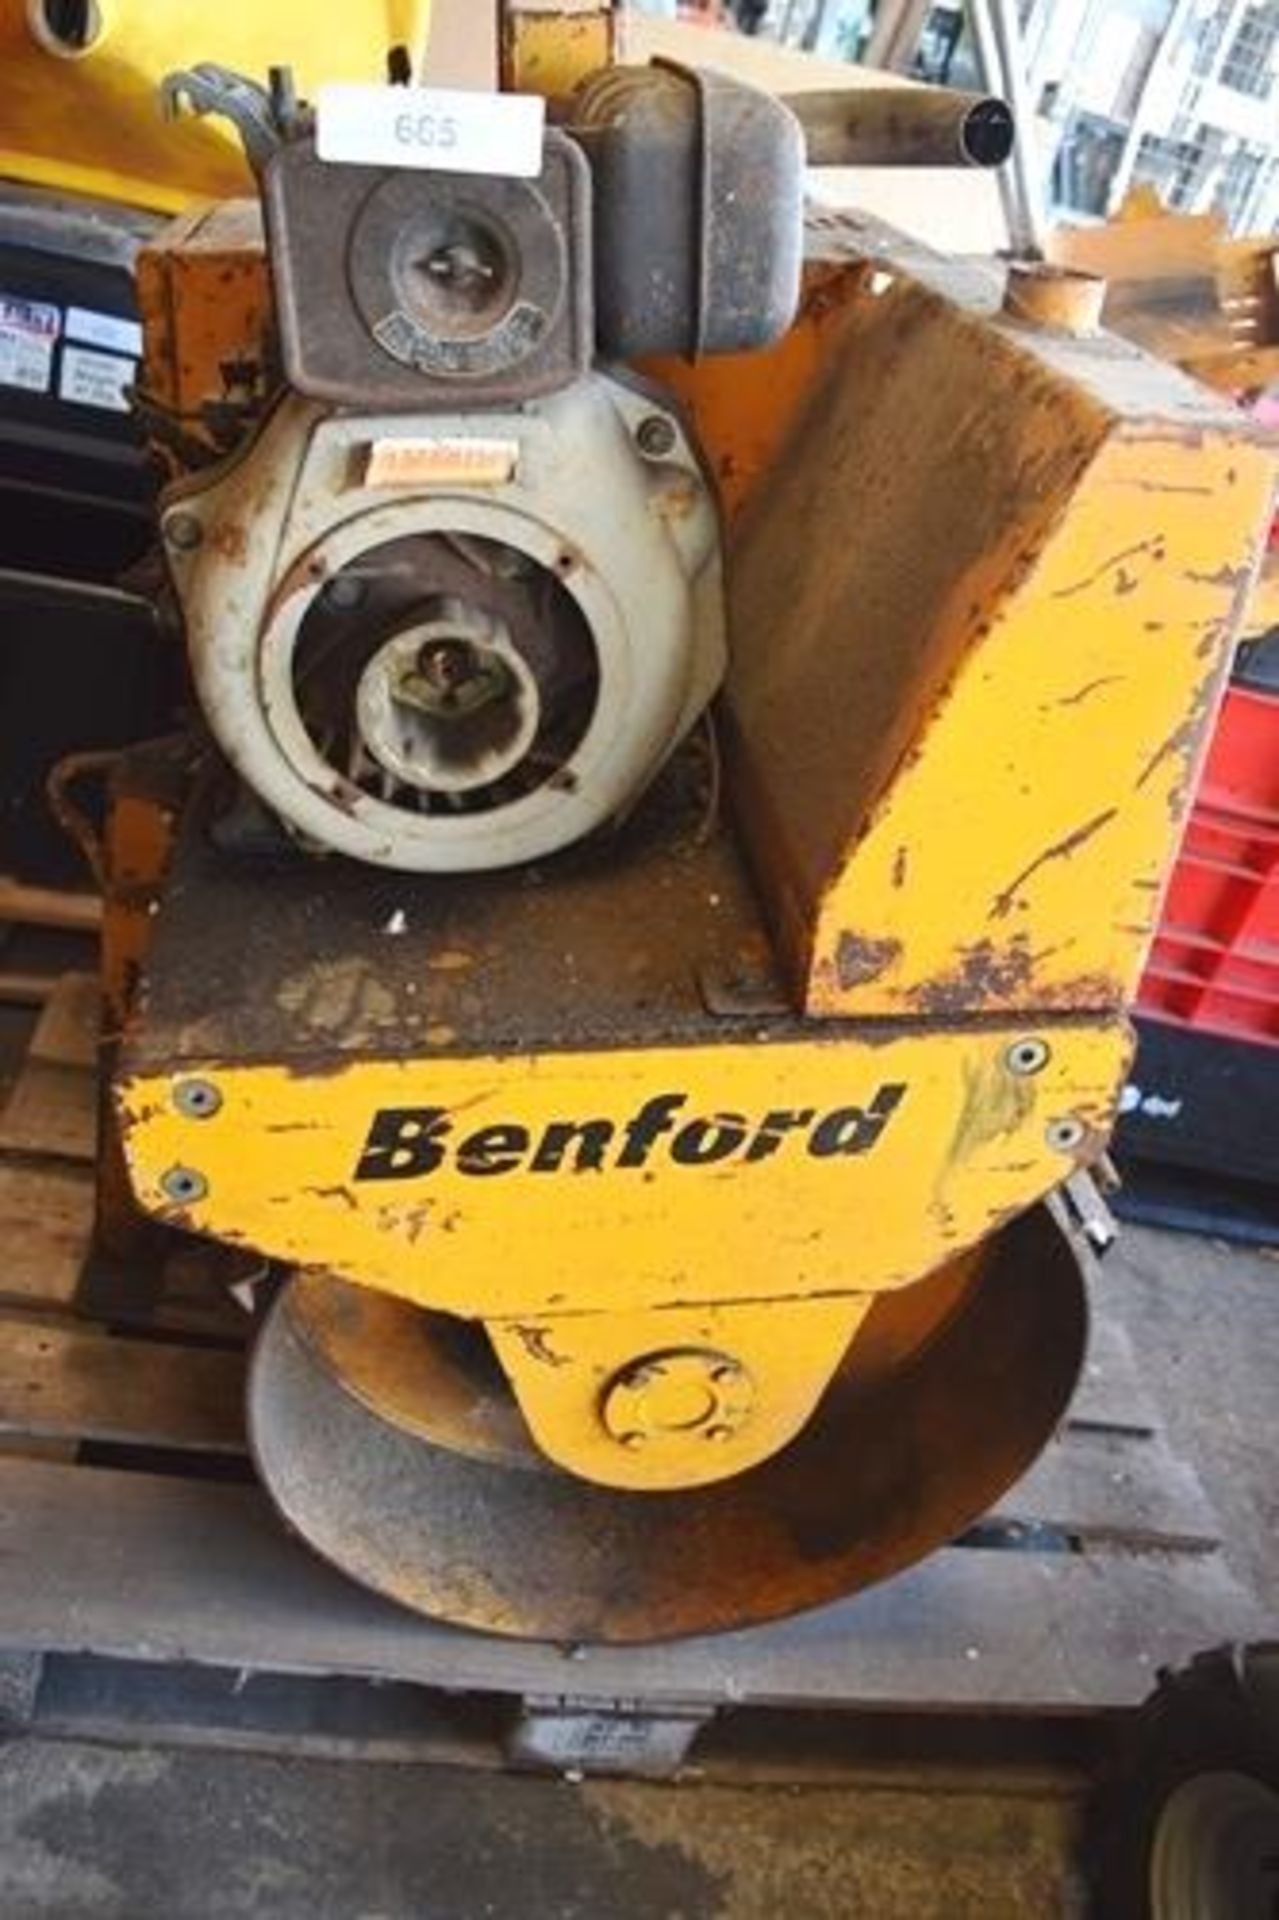 Single drum roller spares, Benford, Mortimer etc and a 2-wheel trailer etc. - Second-hand